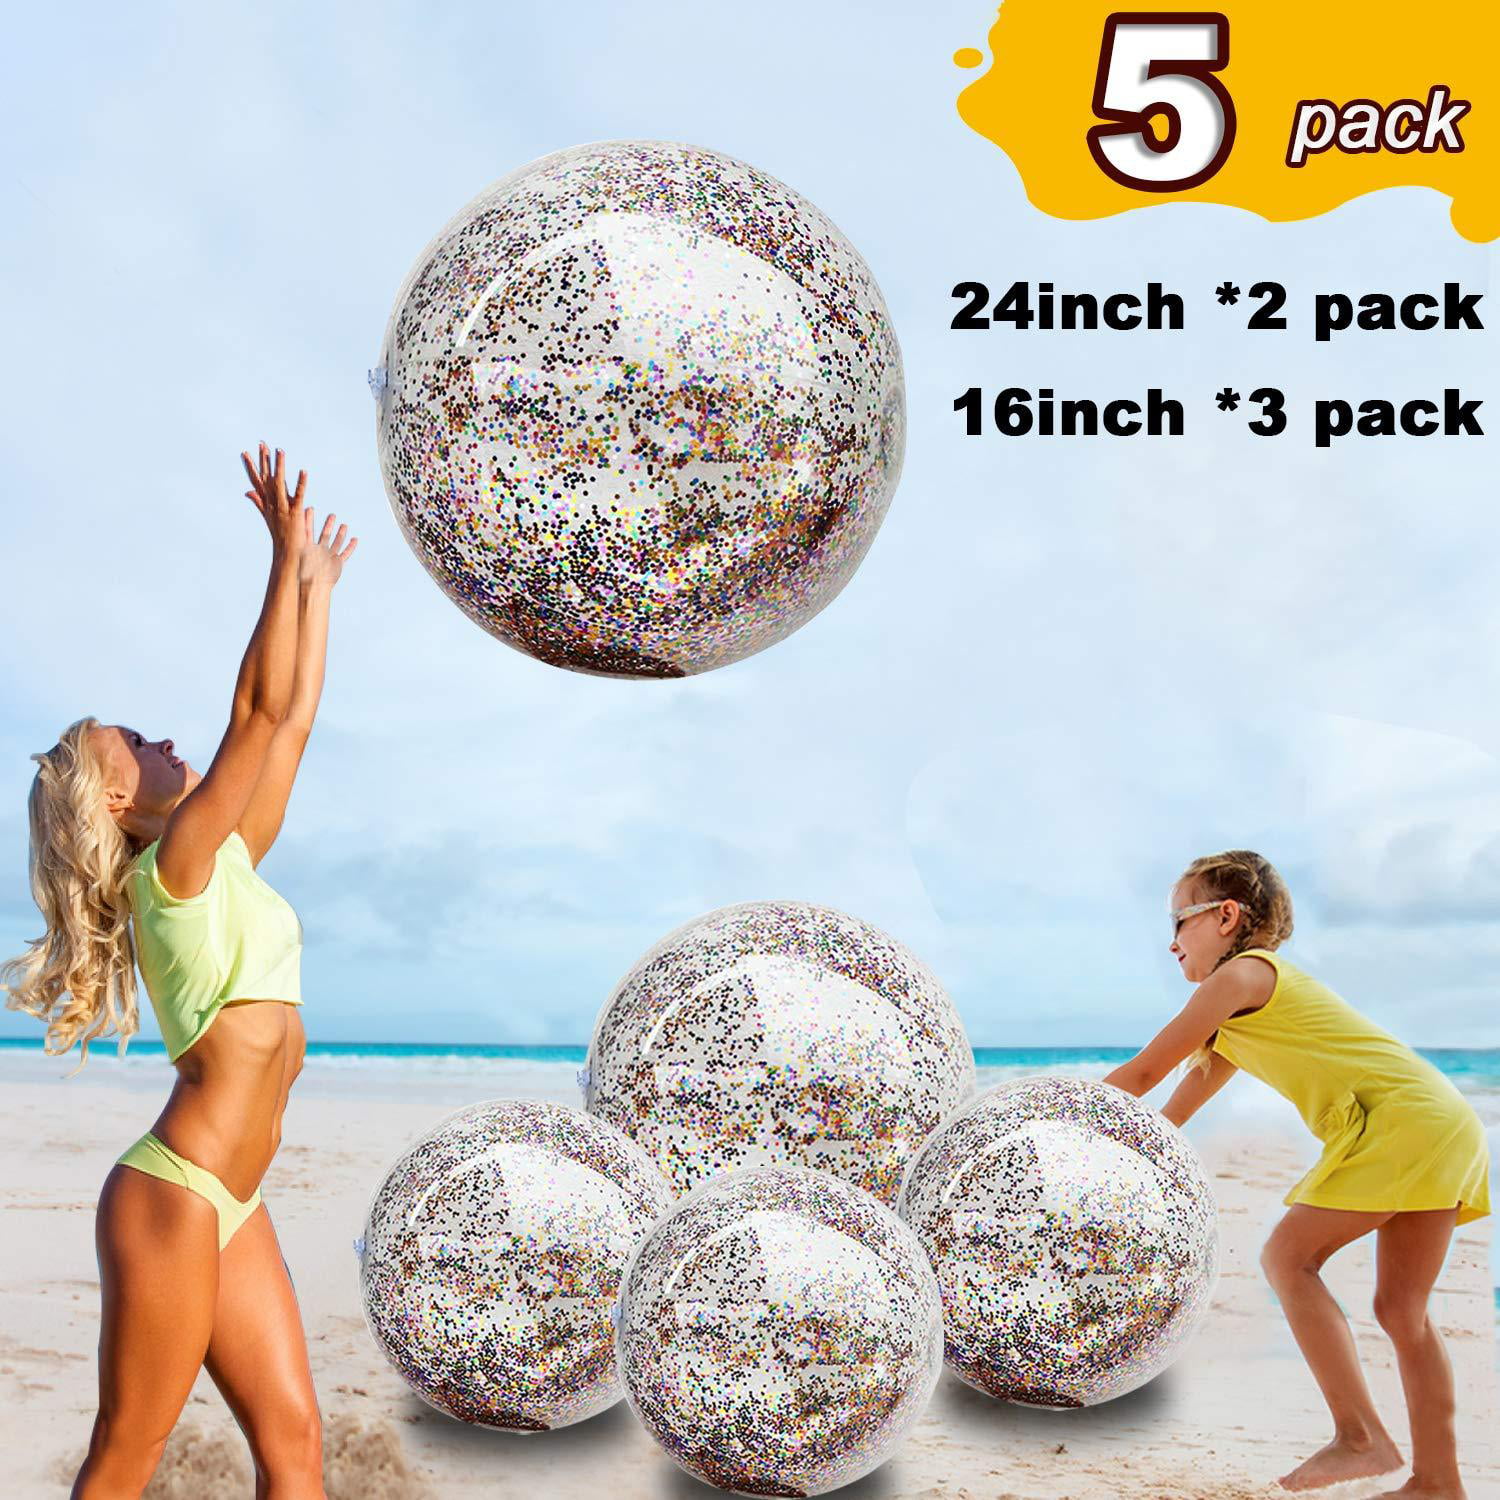 5 NEW MINI BEACH BALLS MULTI COLORED 5" INFLATABLE POOL BEACHBALL PARTY FAVORS